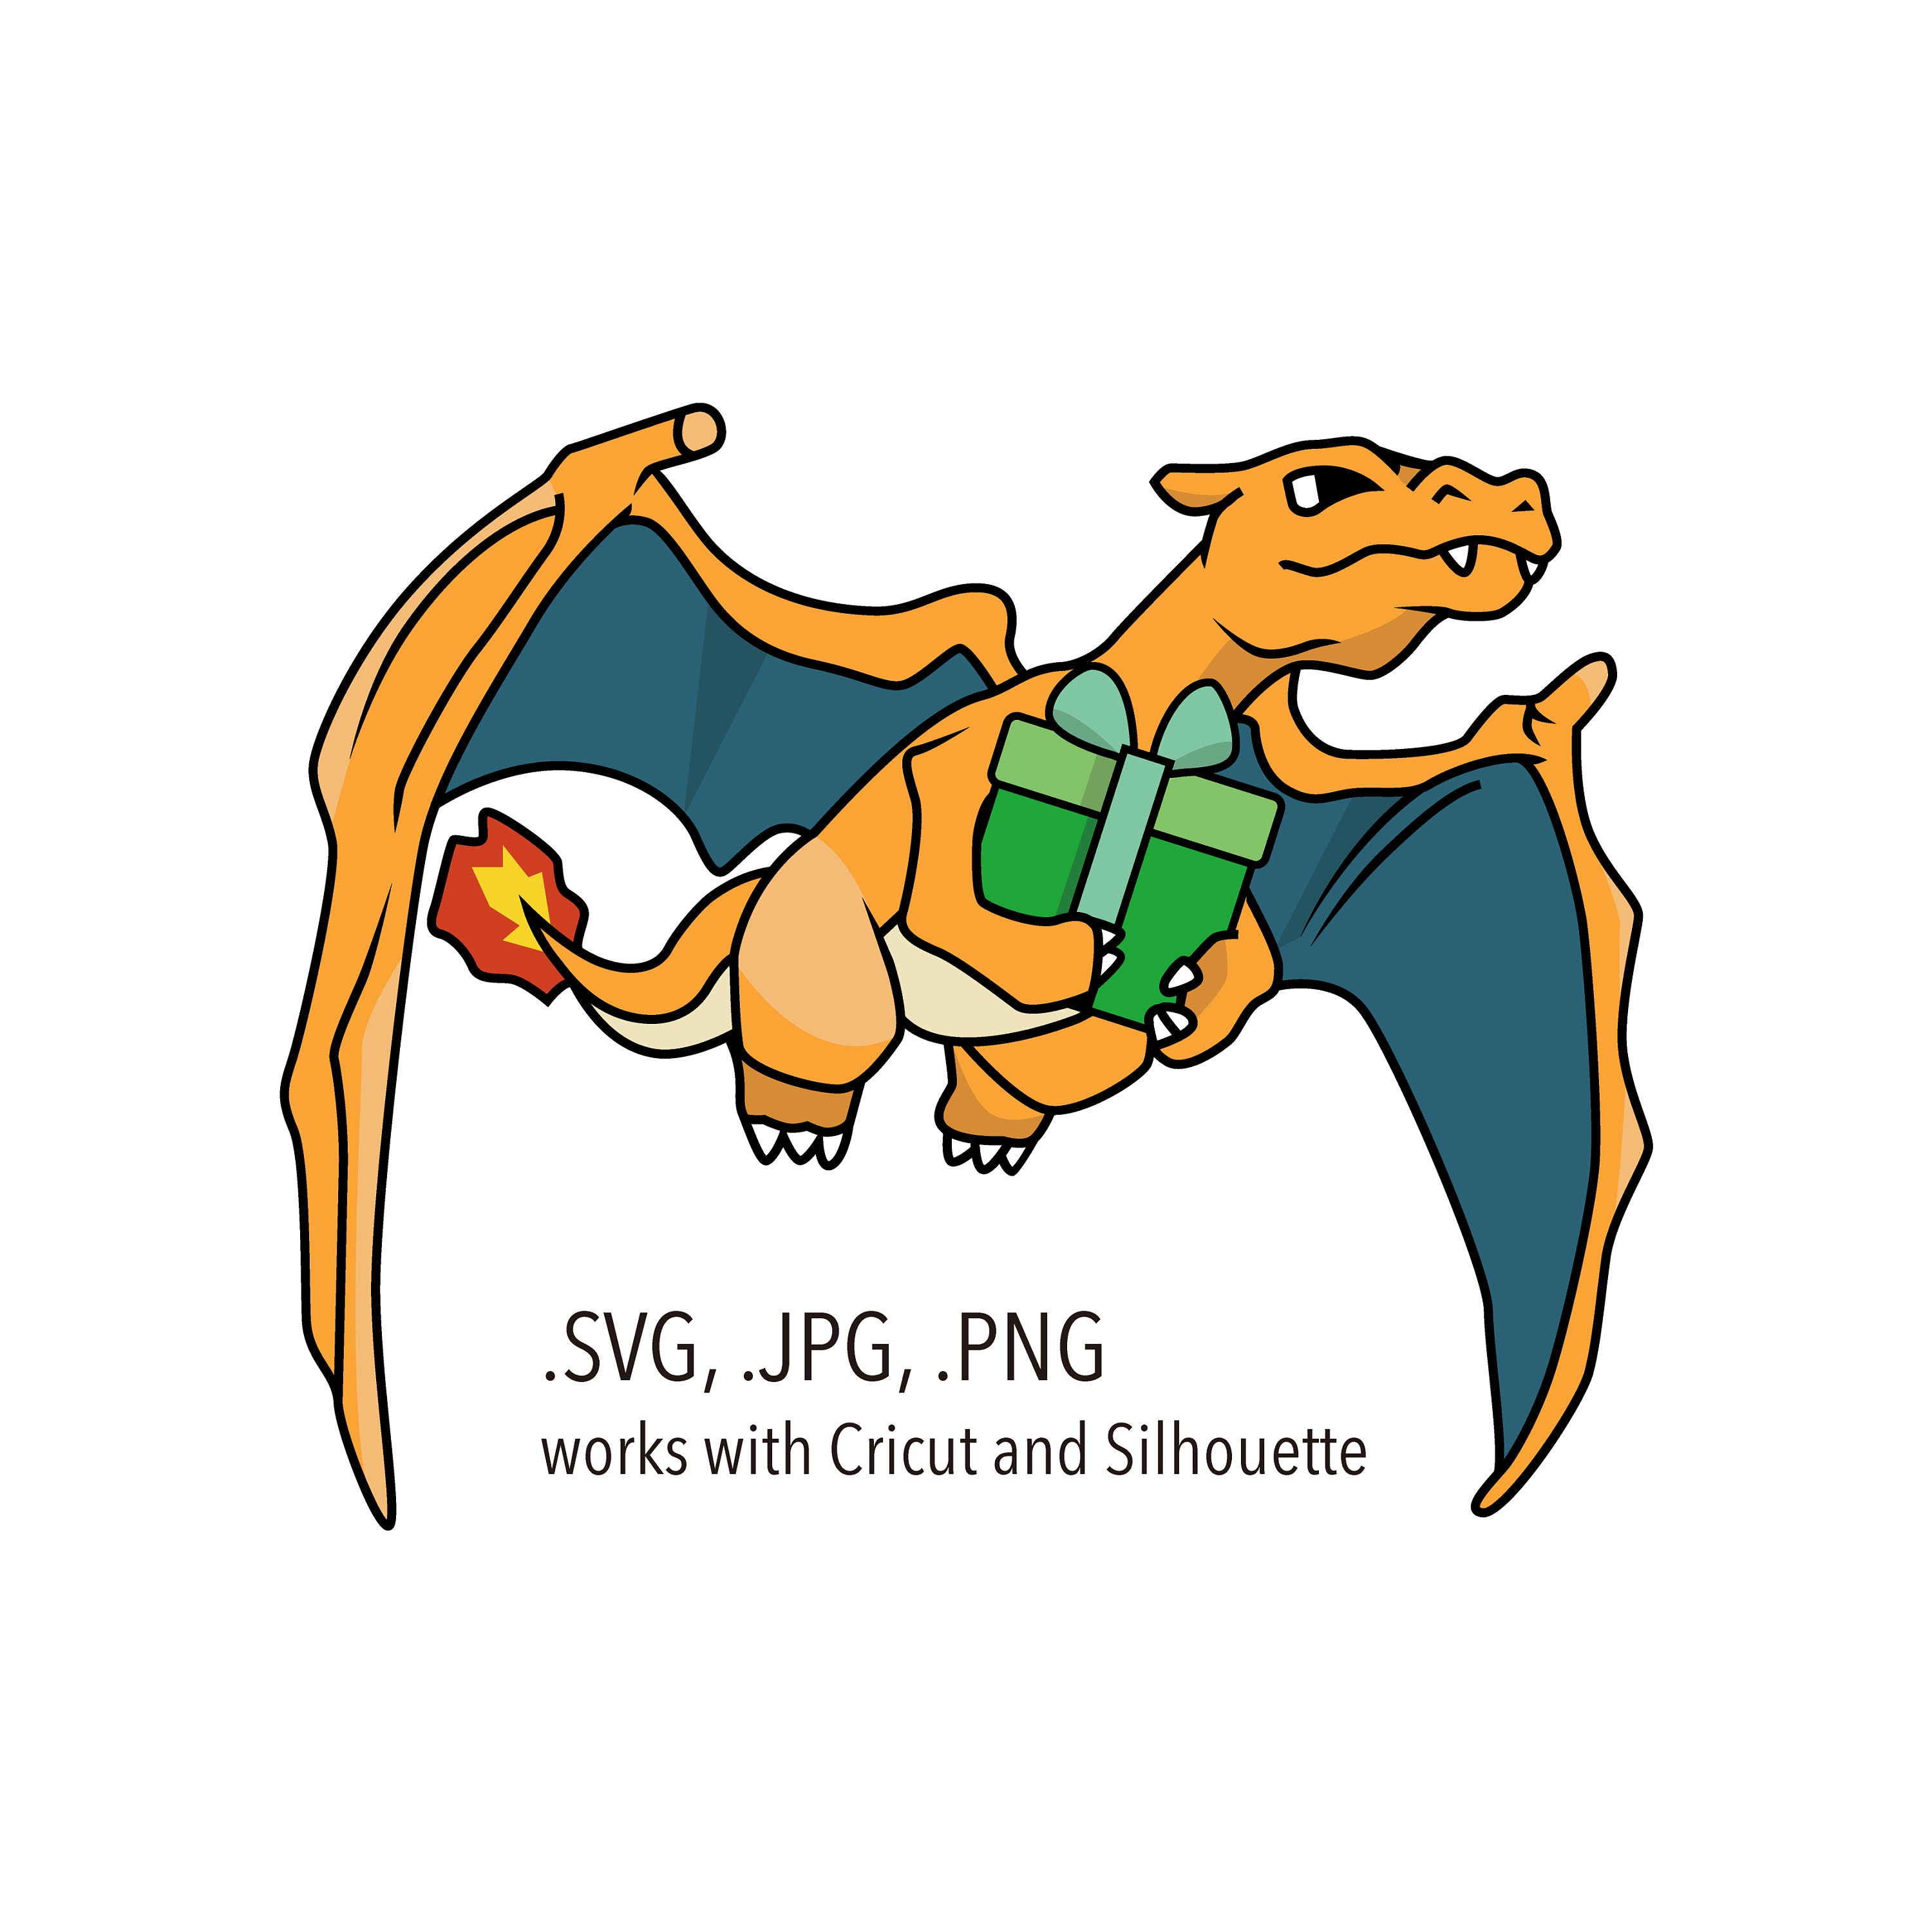 img.kwcdn.com/product/charizard-squirtle-canvas-pa